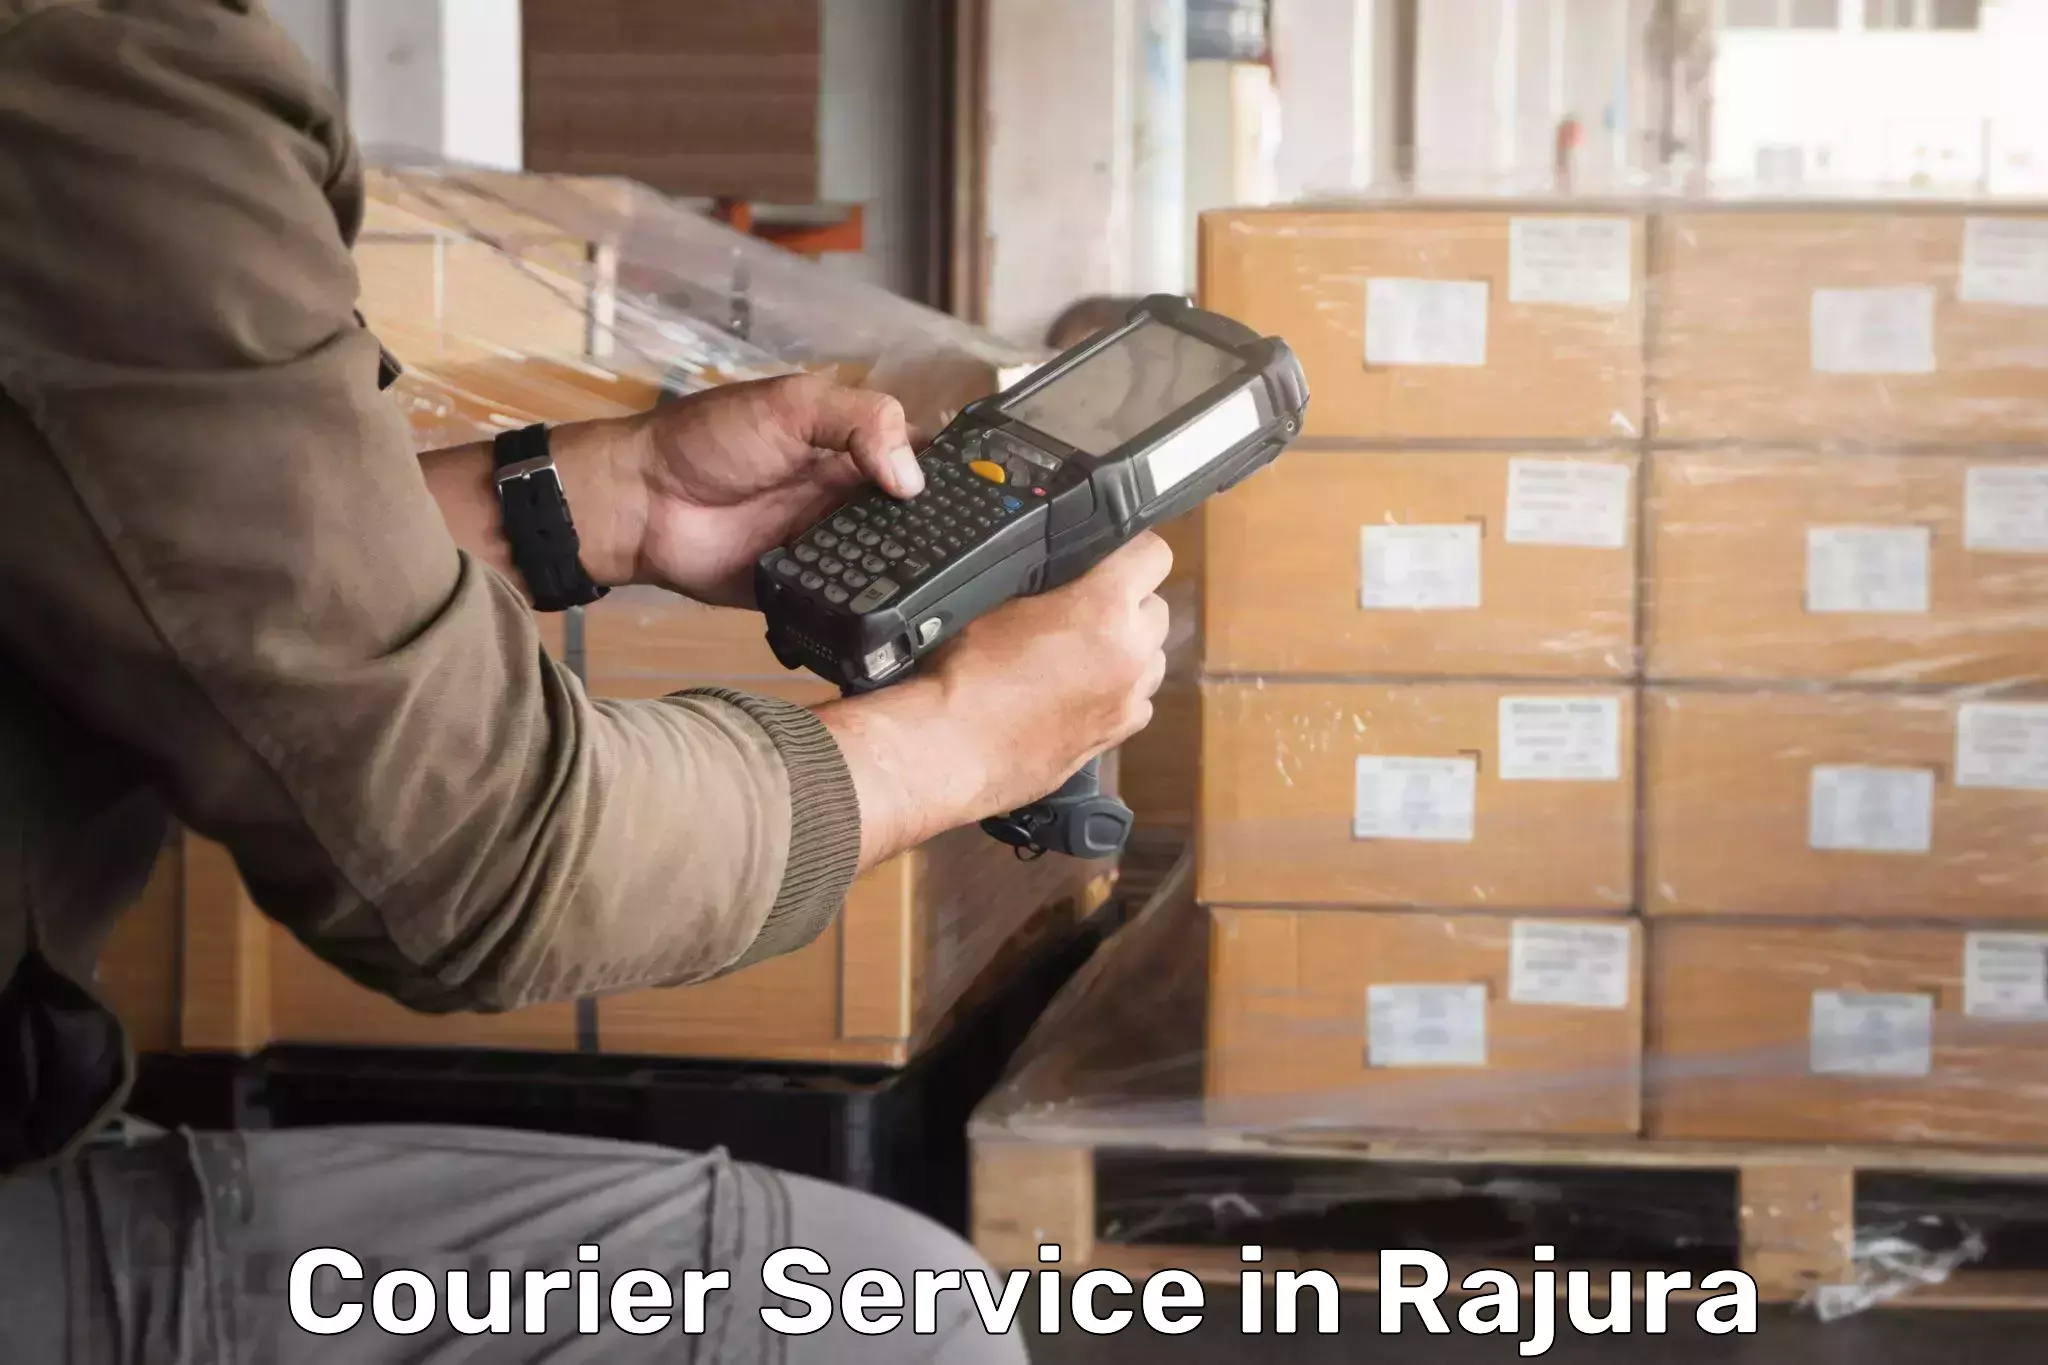 Full-service courier options in Rajura